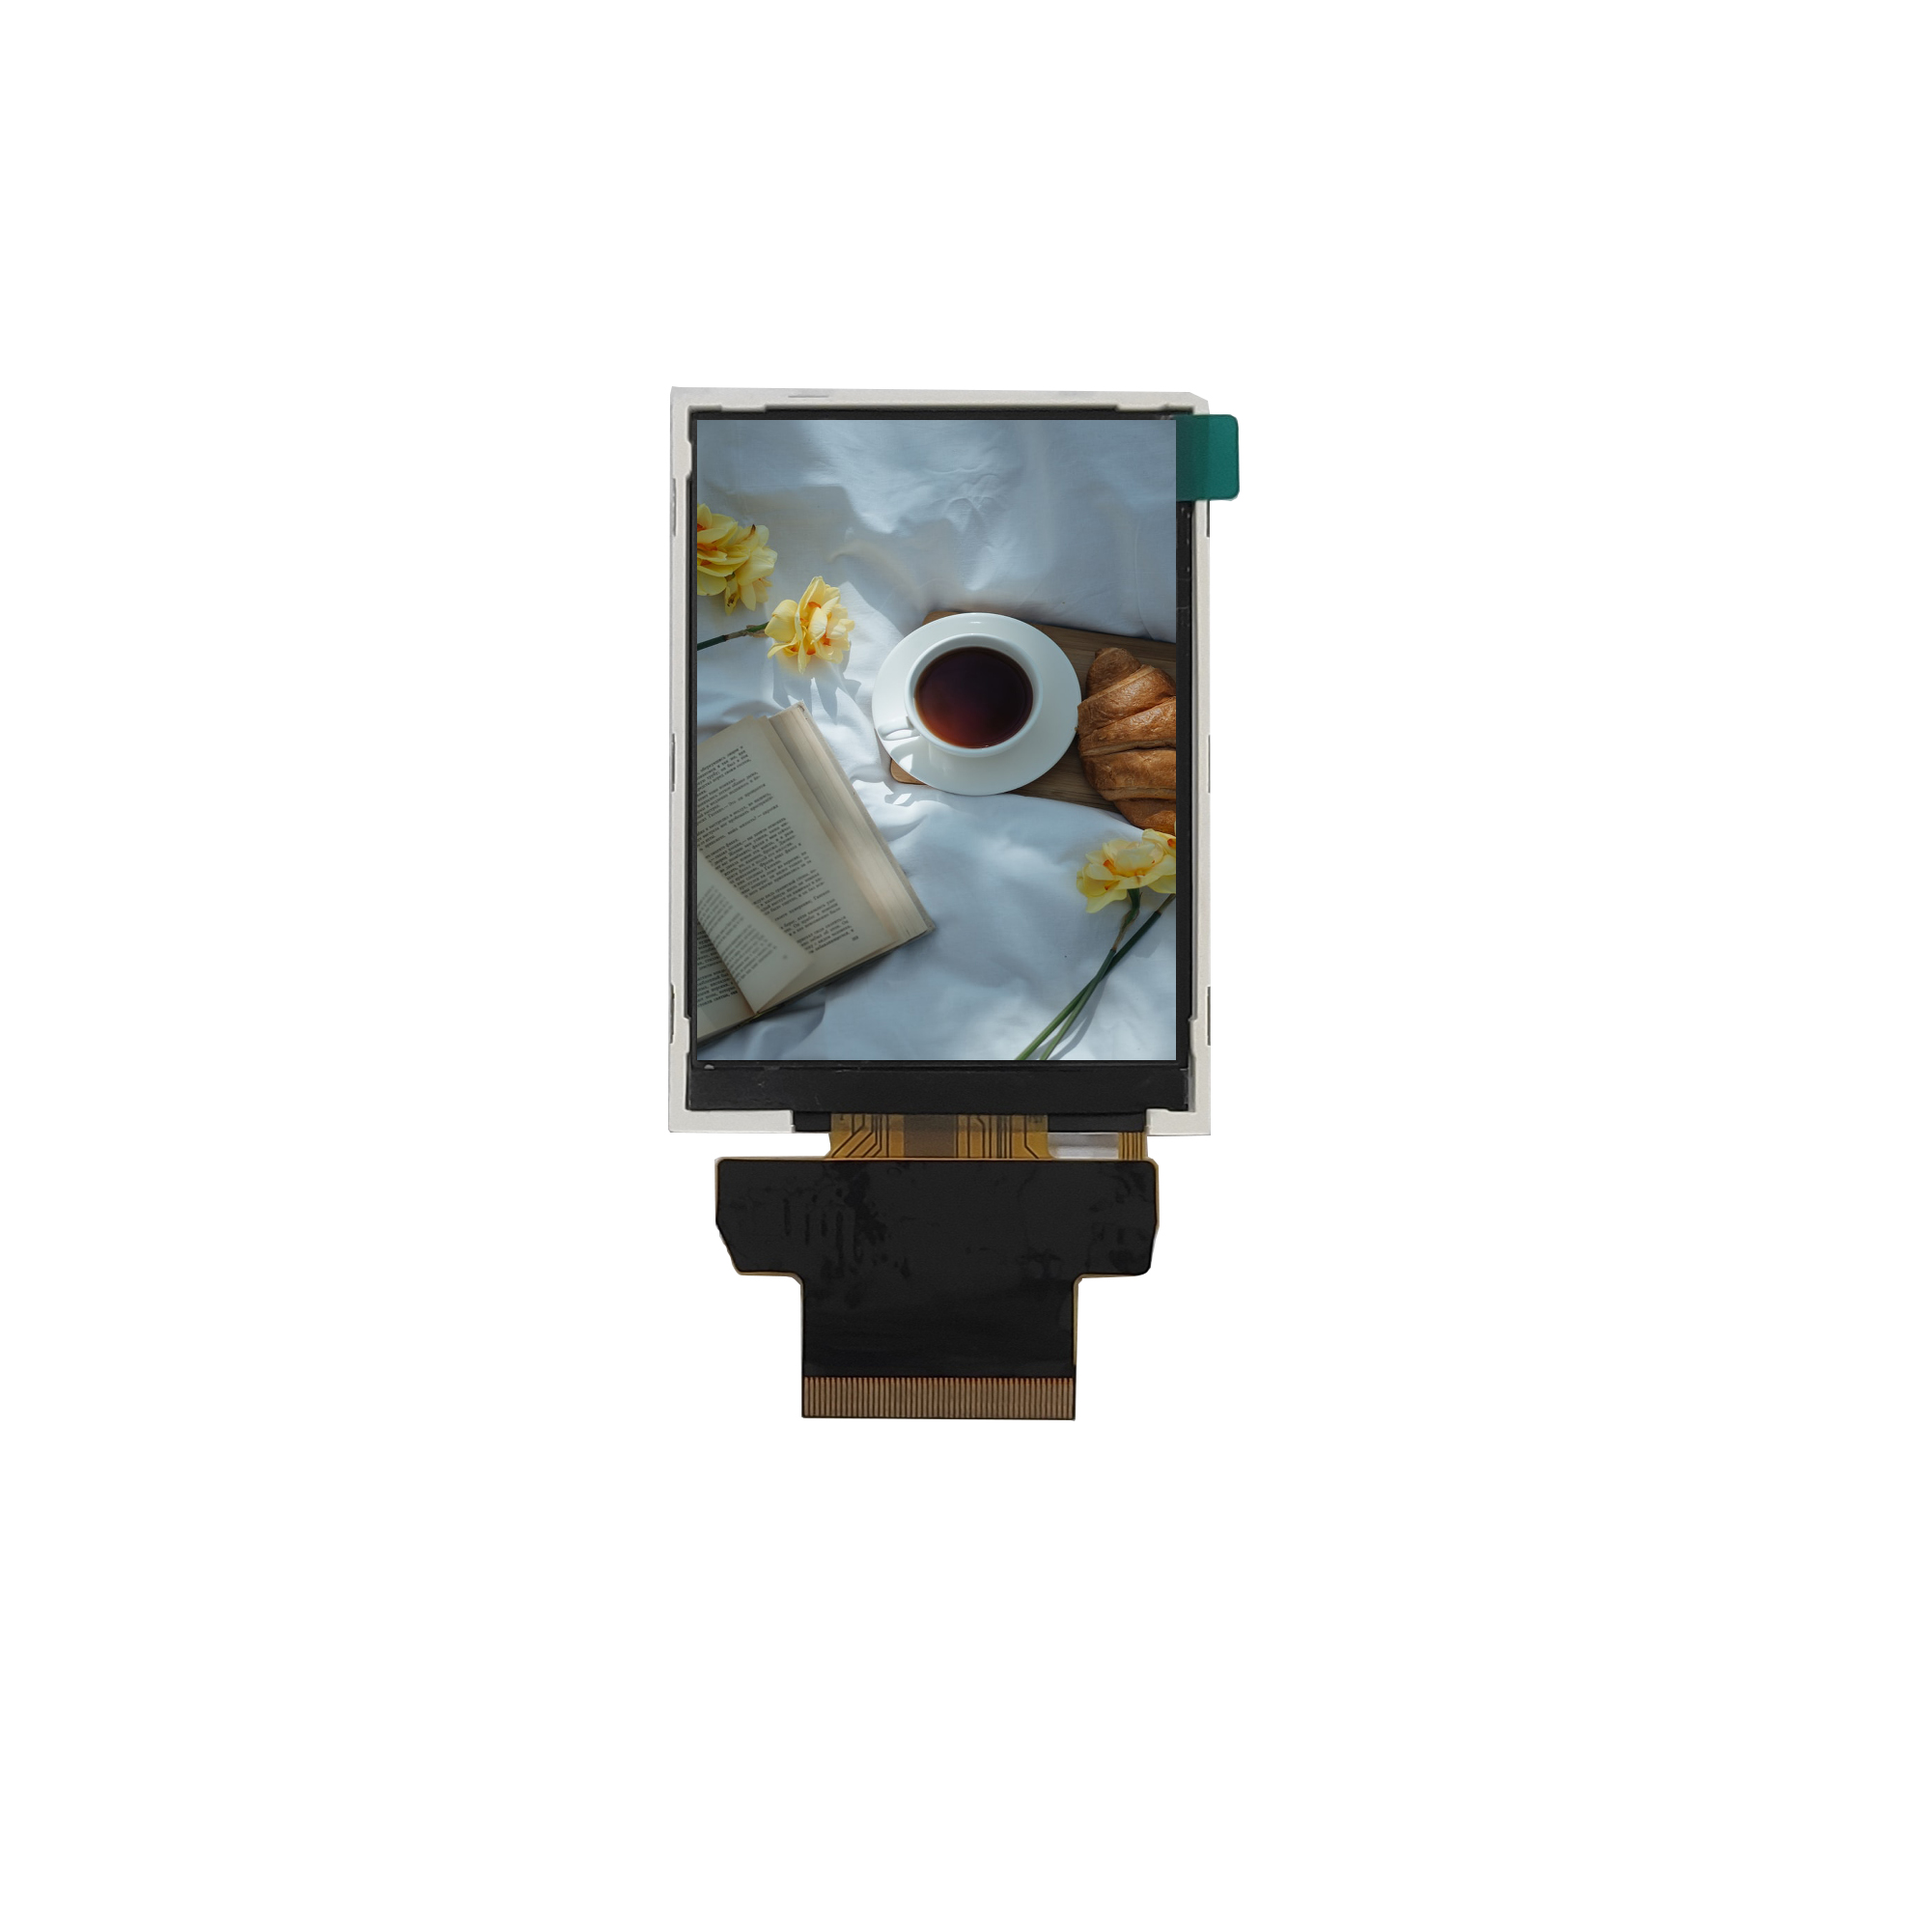 2.8 inch IPS TFT LCD display with RGB/MCU/SPI interface